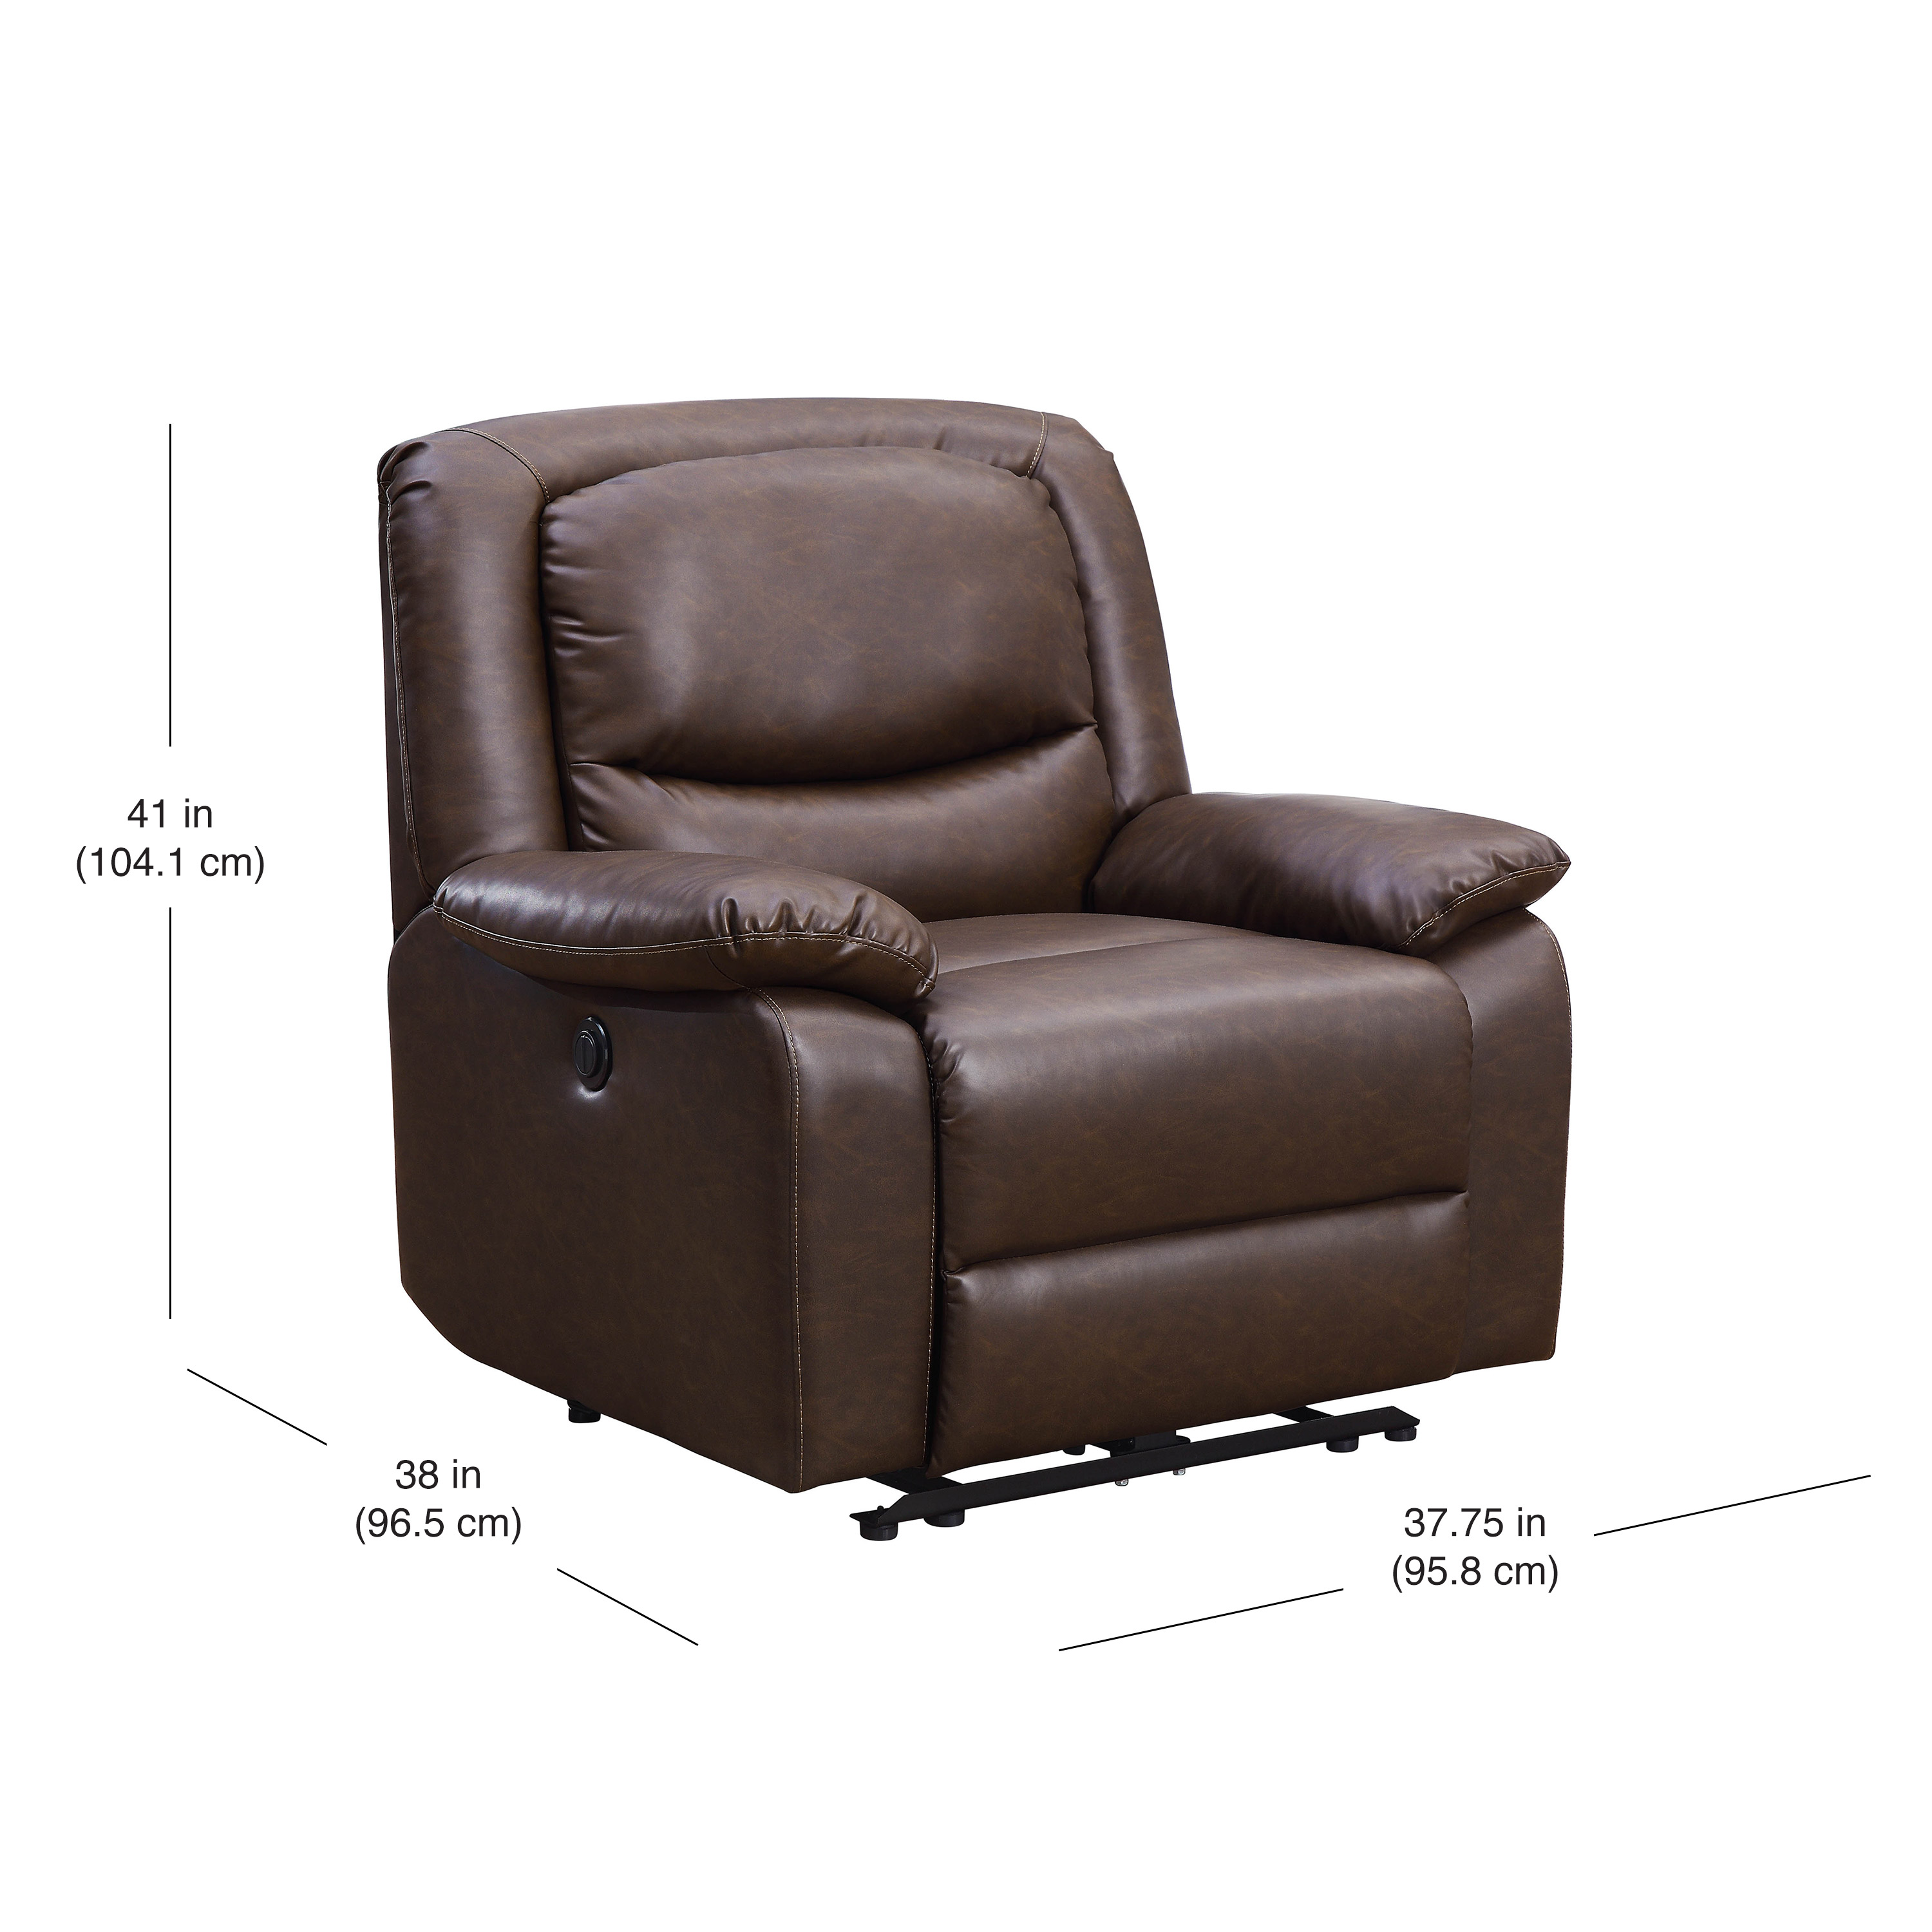 Serta Push-Button Power Recliner with Deep Body Cushions, Brown Faux Leather Upholstery - image 9 of 9